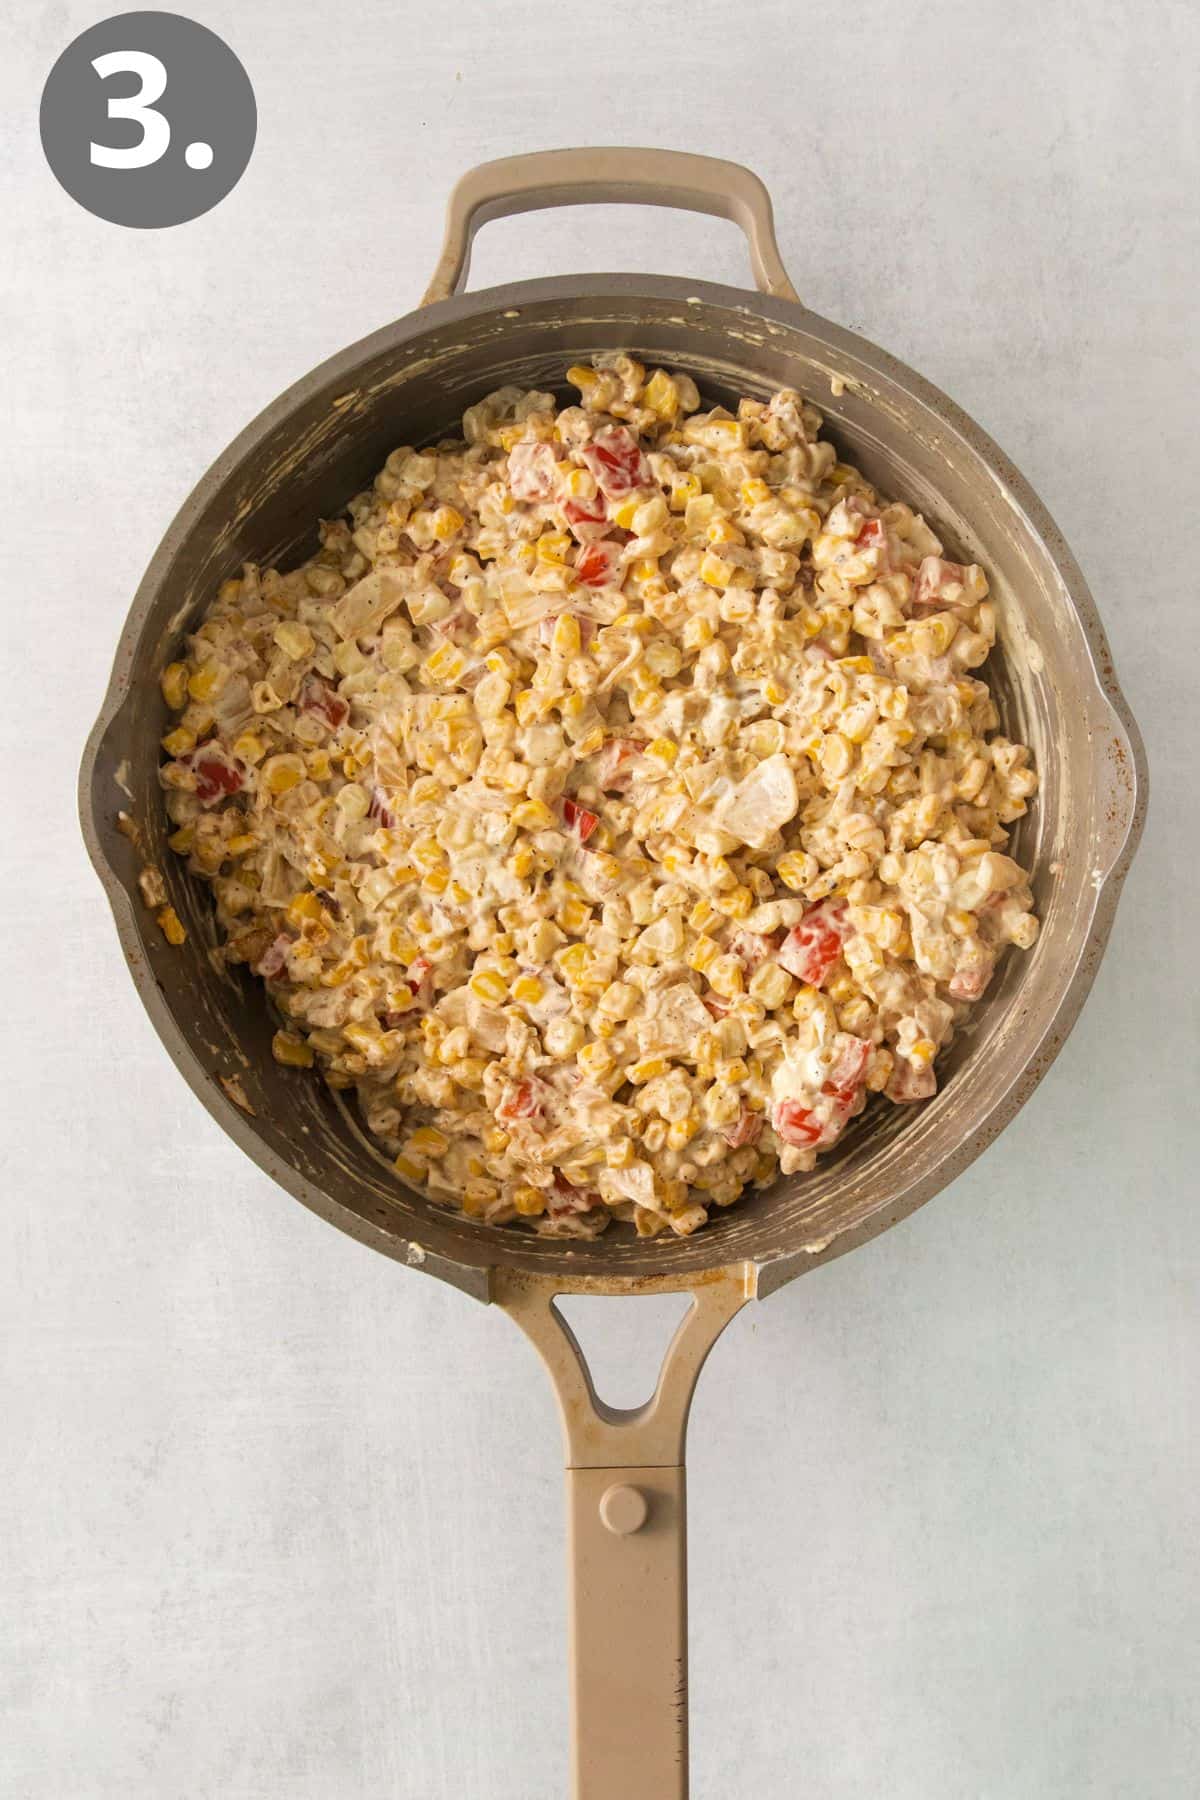 Cream cheese, milk, and seasonings added to the cream cheese corn in a skillet